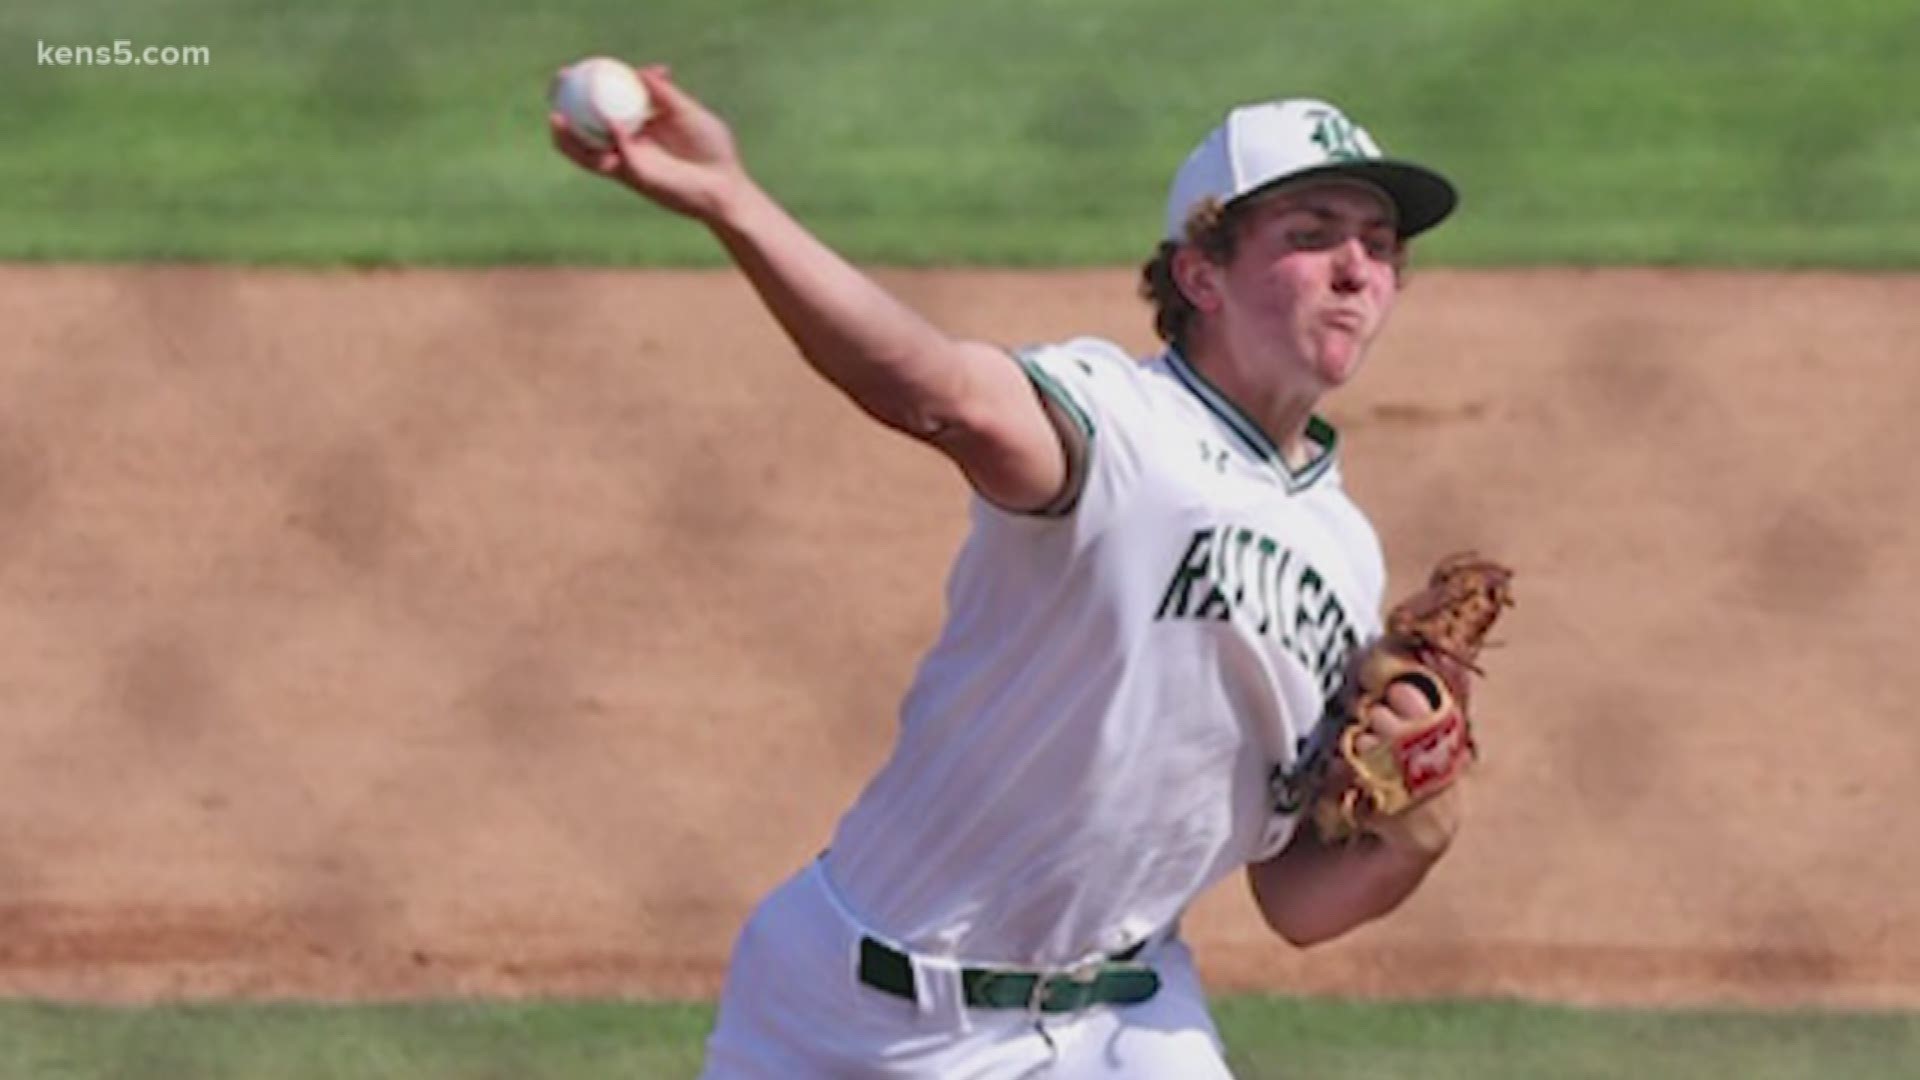 Vinnie Vinzetta talked to the Rattler's ace about coronavirus ending his senior season prematurely, and what's coming next for the righty out of Reagan.